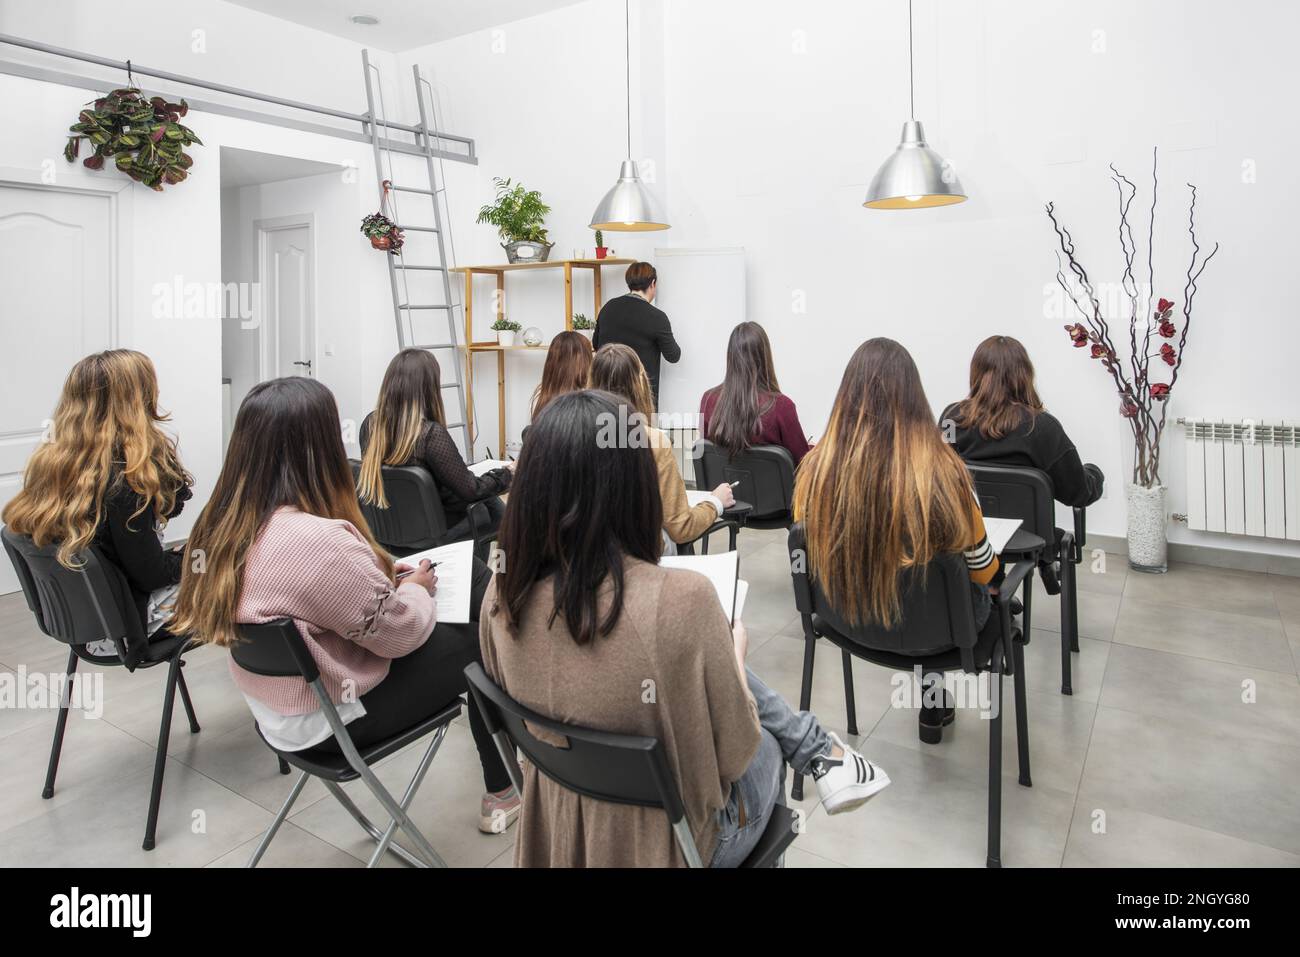 Classroom full of attentive female students looking at the teacher Stock Photo